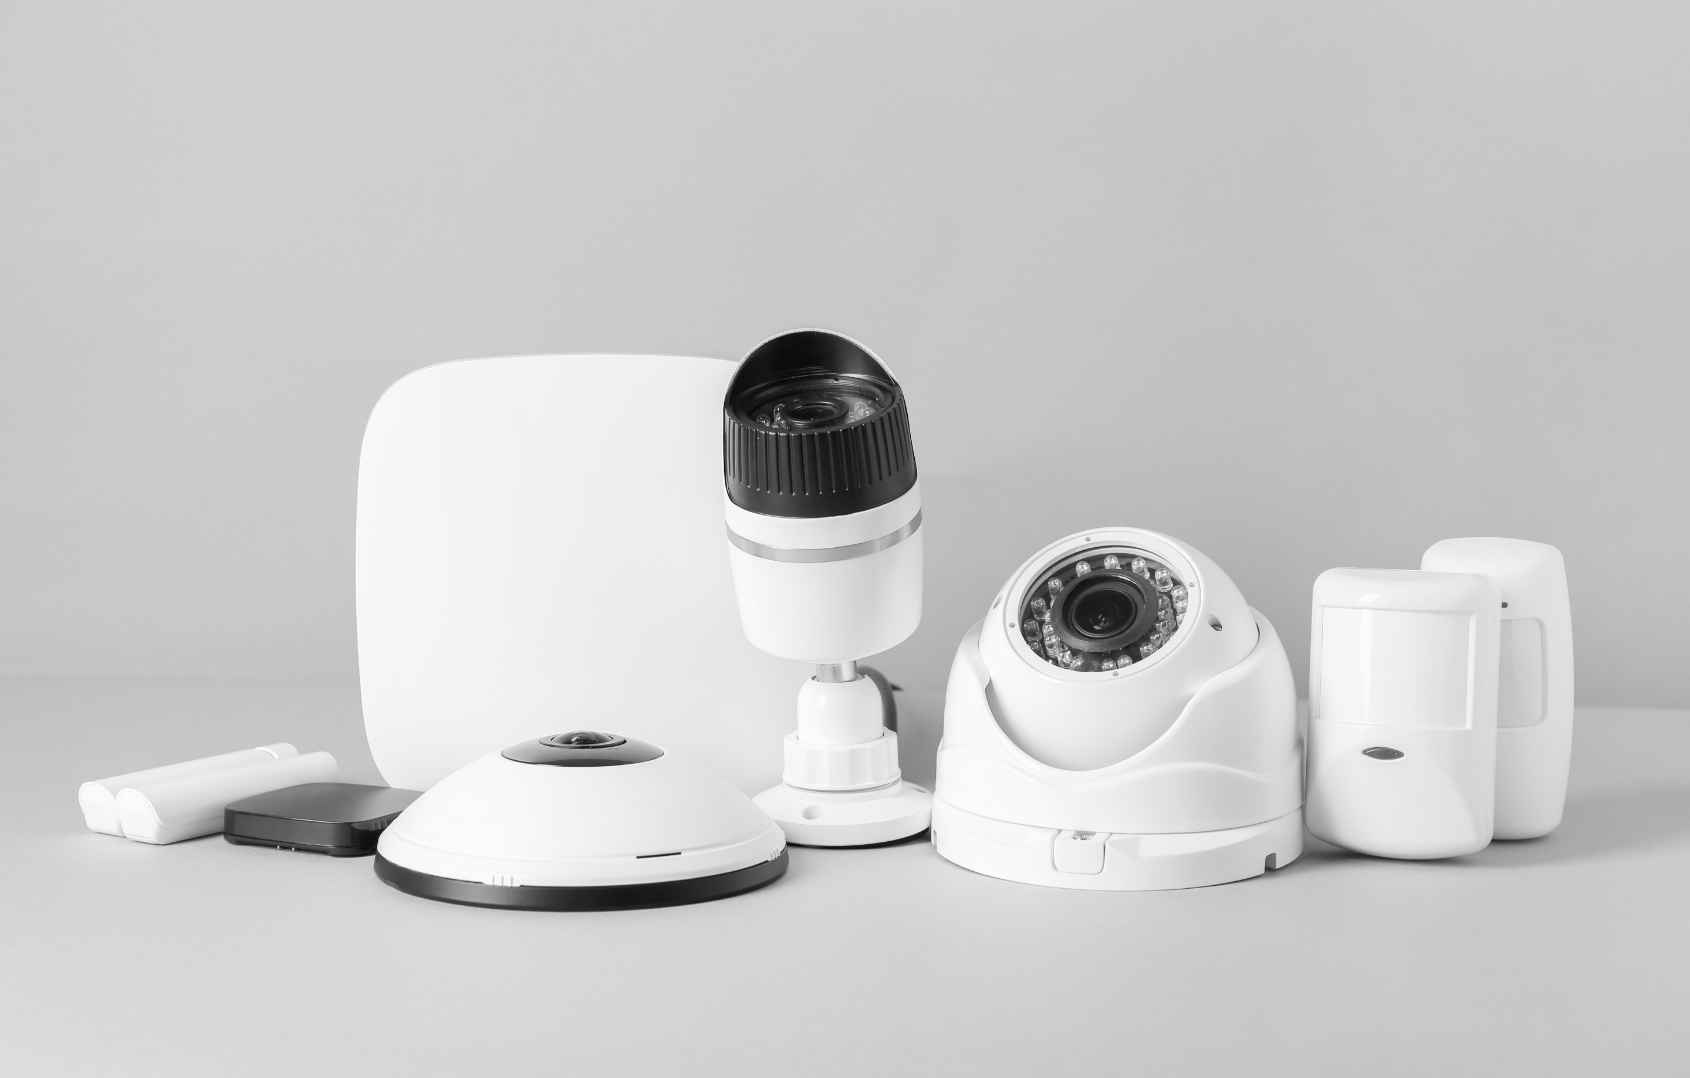 a collection of security sensors